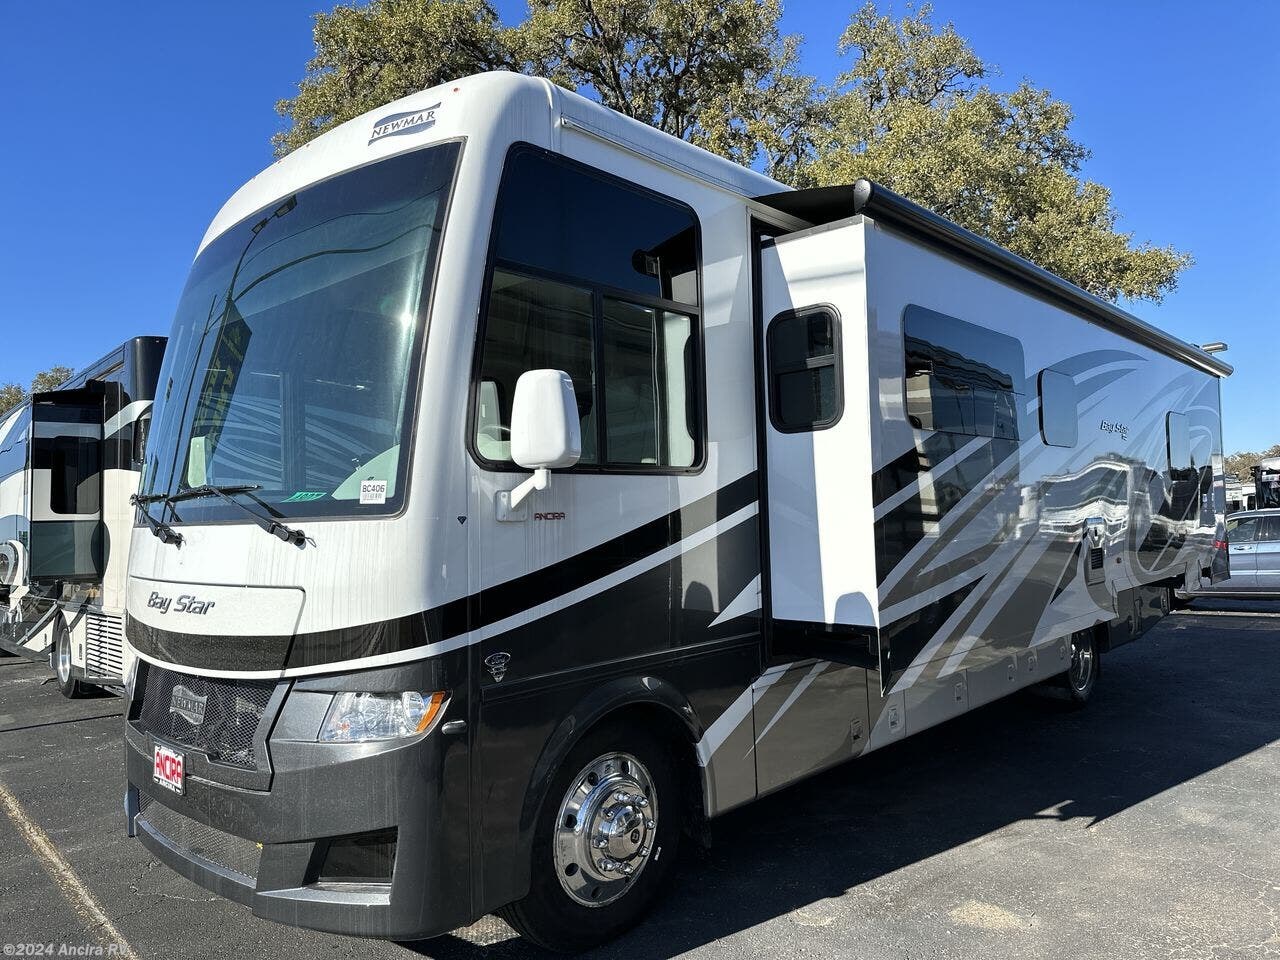 2023 Newmar Bay Star 3225 RV for Sale in Boerne, TX 78006-9250 | BC406 ...